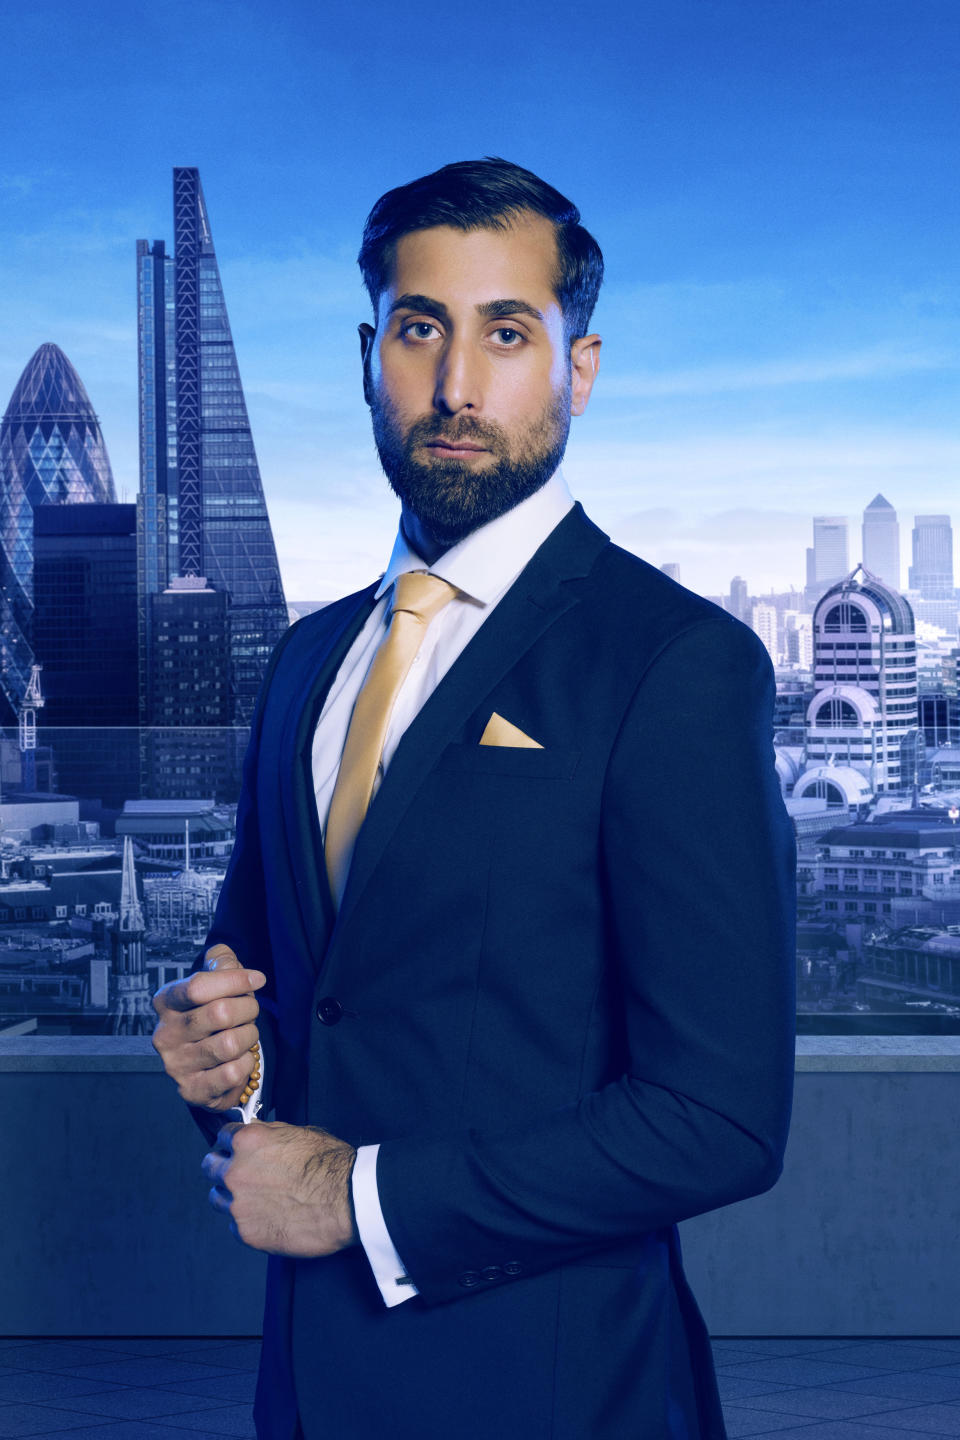 Asif starred on The Apprentice but won't appear on You're Fired. (BBC)